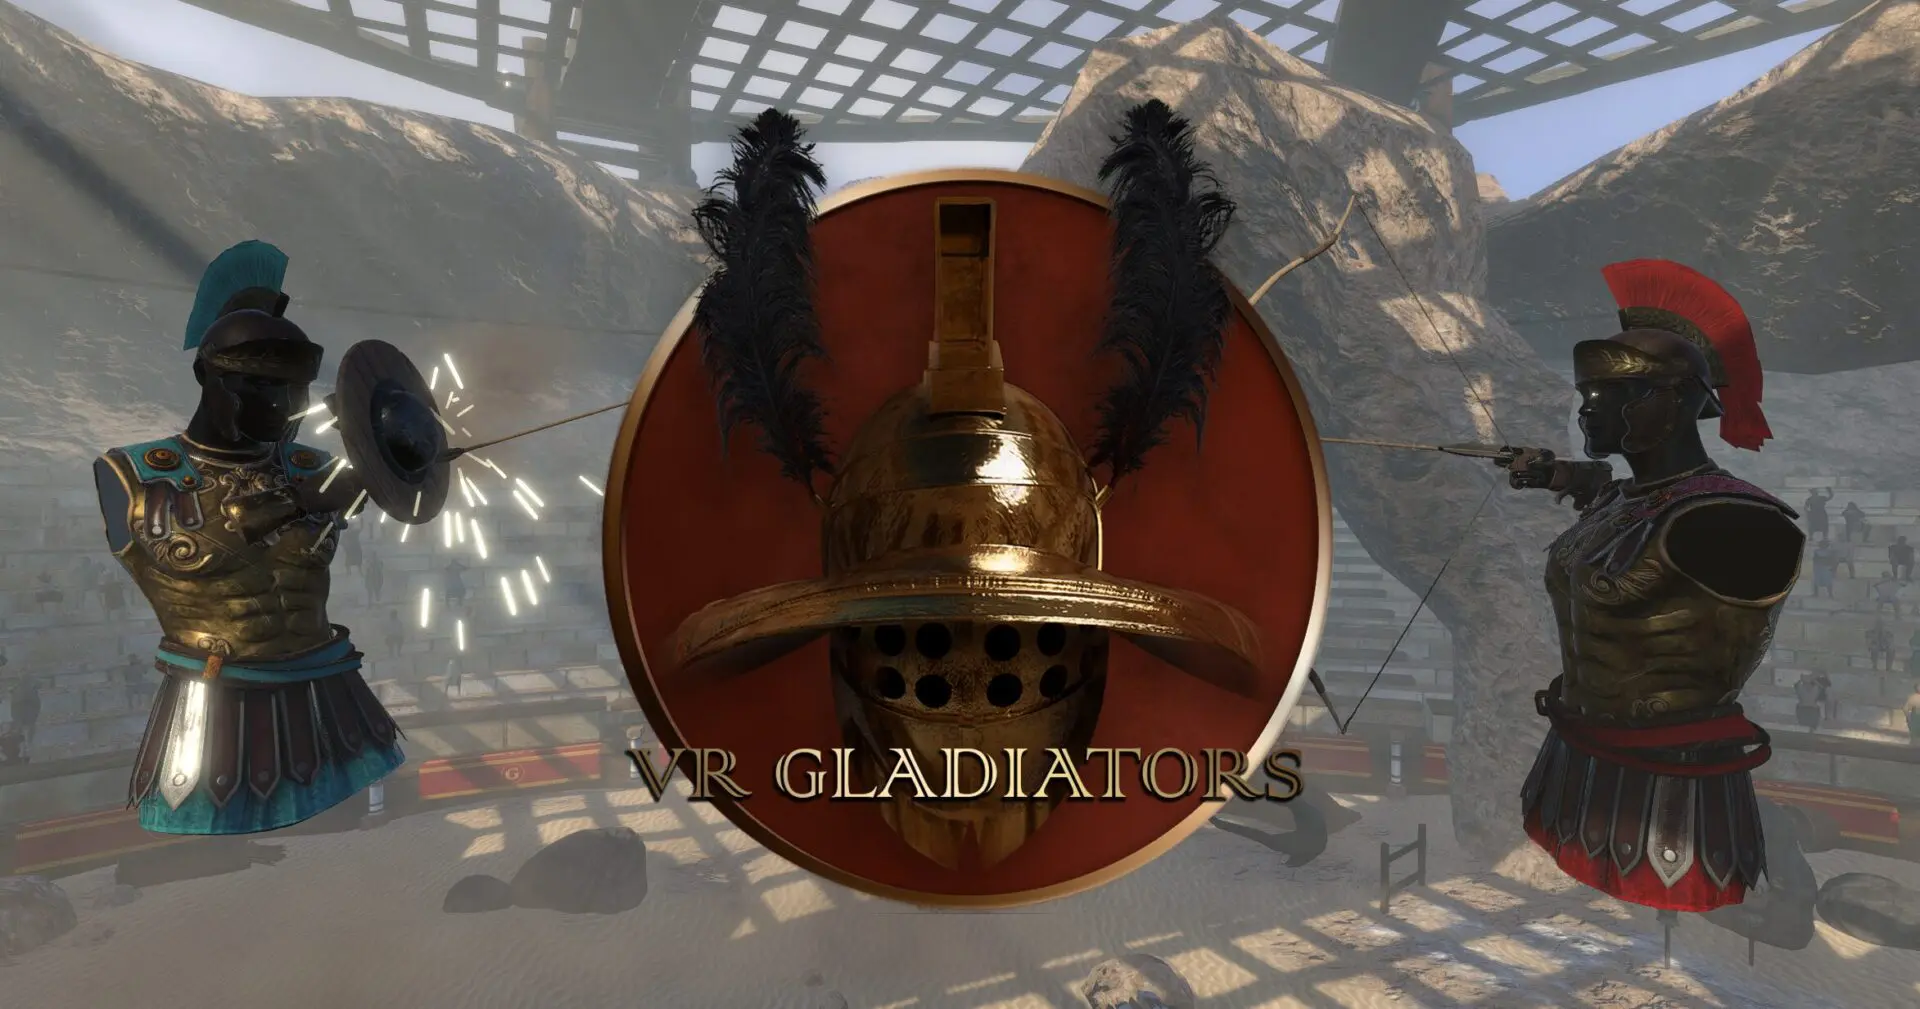 Platform to compete with each other with archery and spears. Gladiators written in the centre